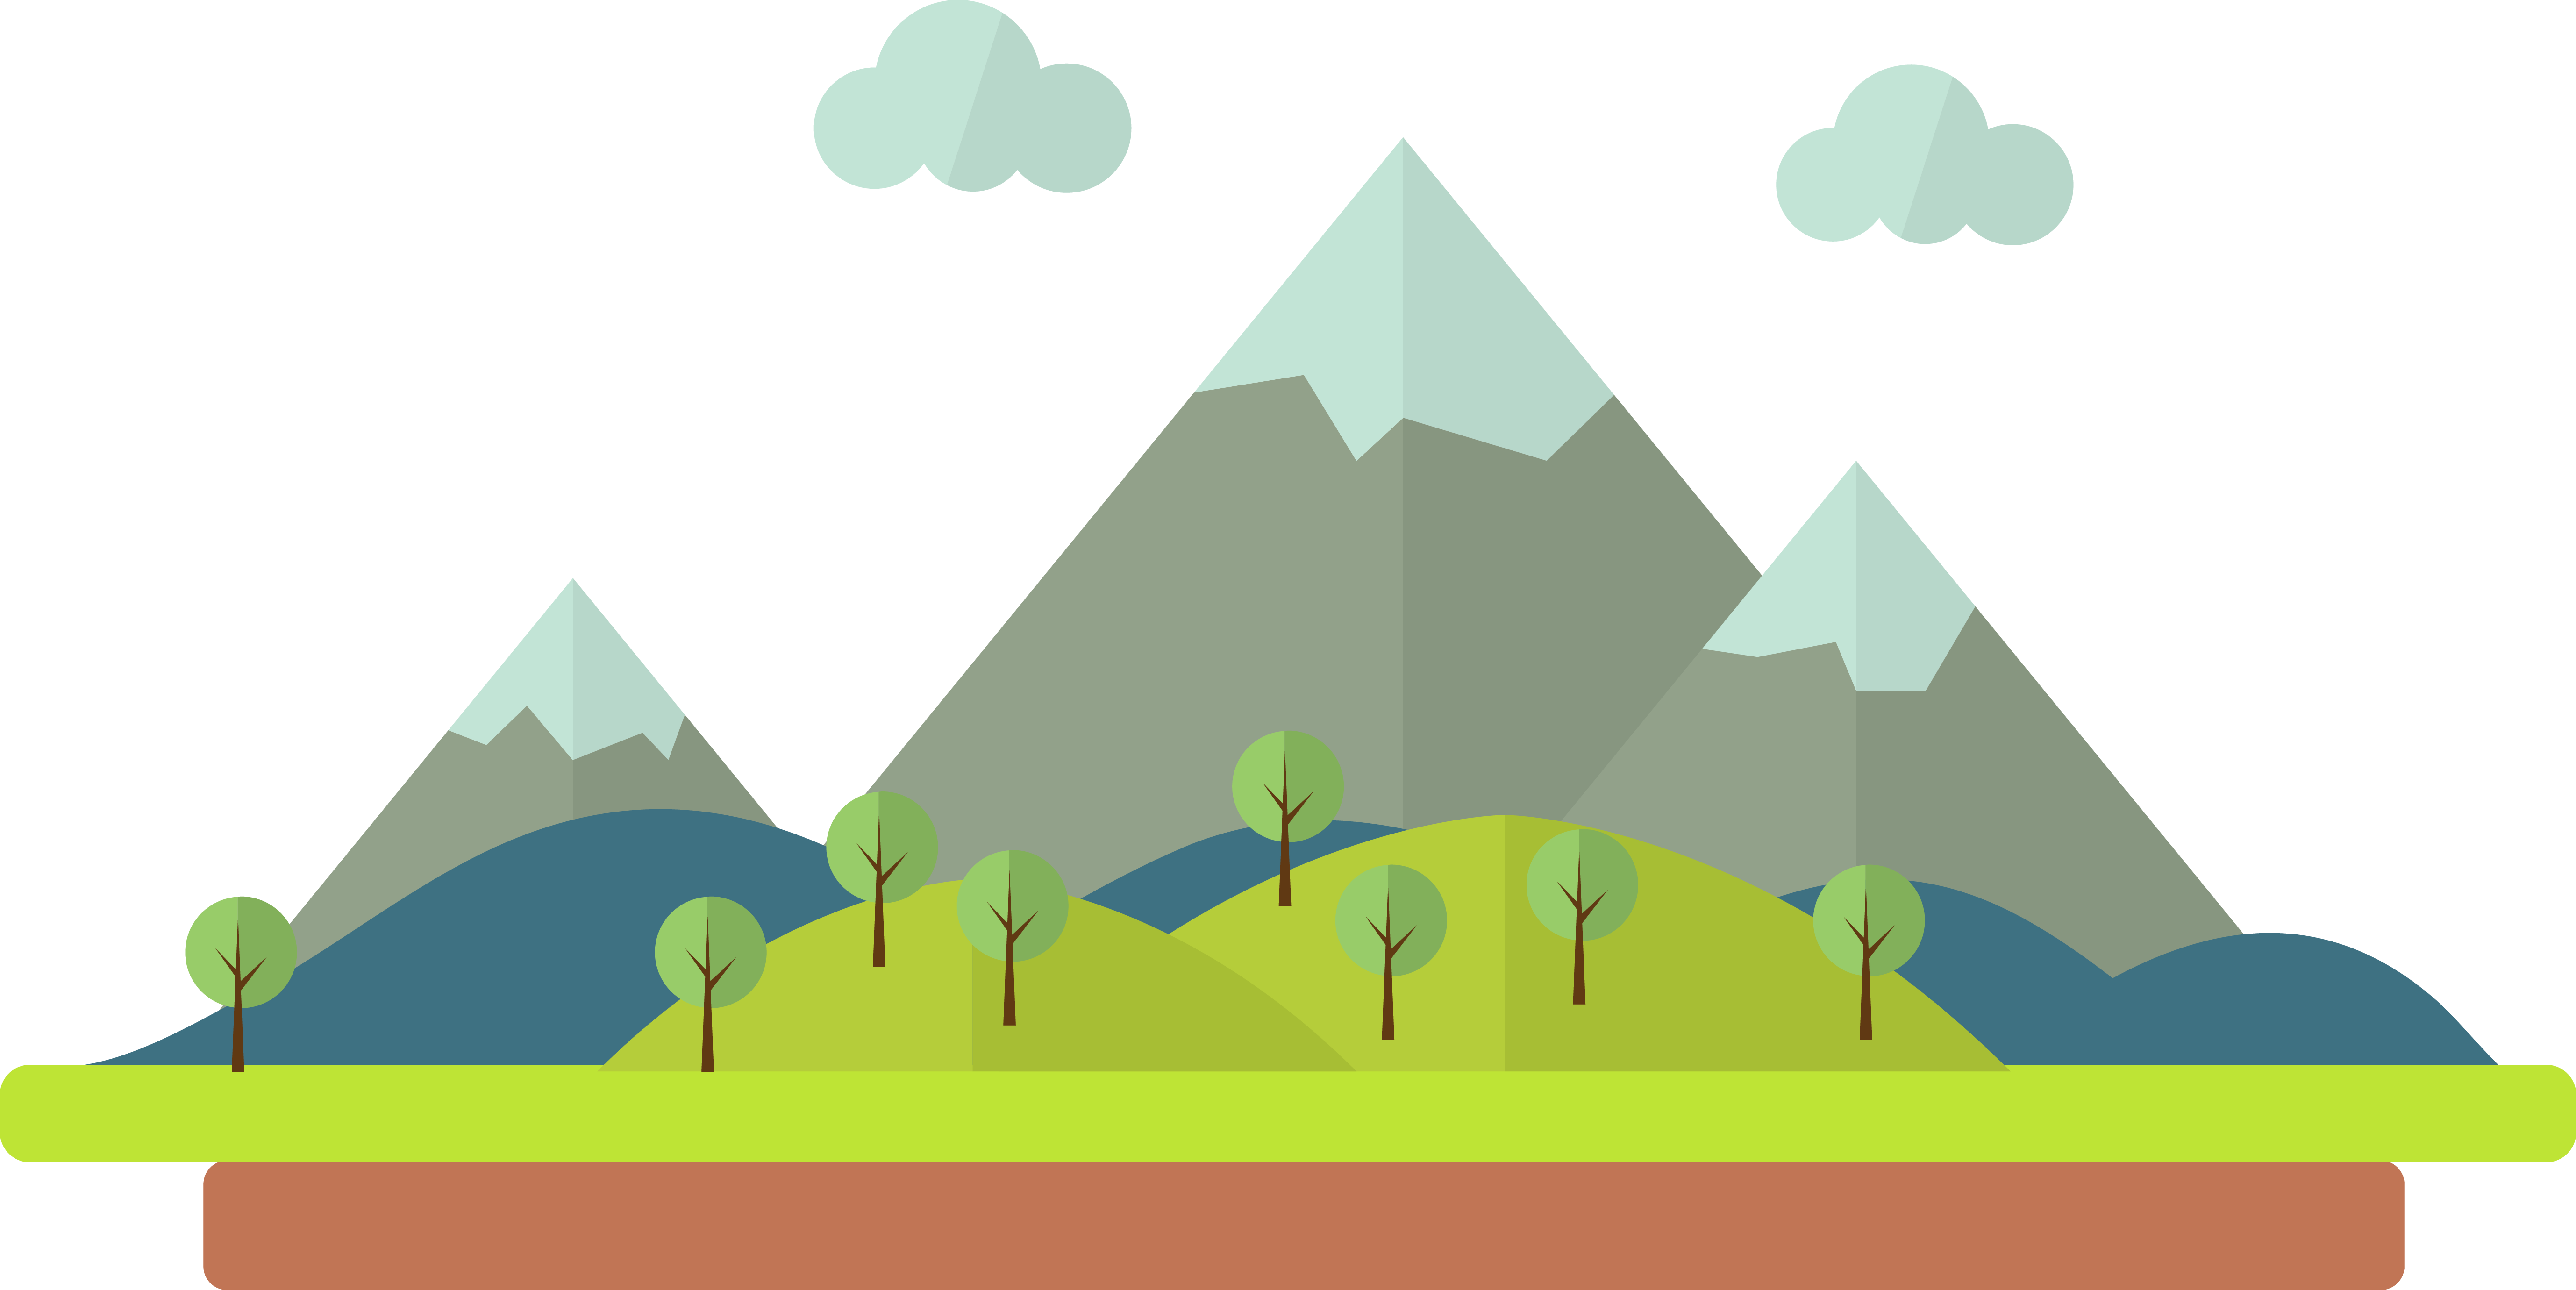 Mountains Clipart Mountain Landscape Mountains Mountain Landscape Transparent Free For Download On Webstockreview 2020